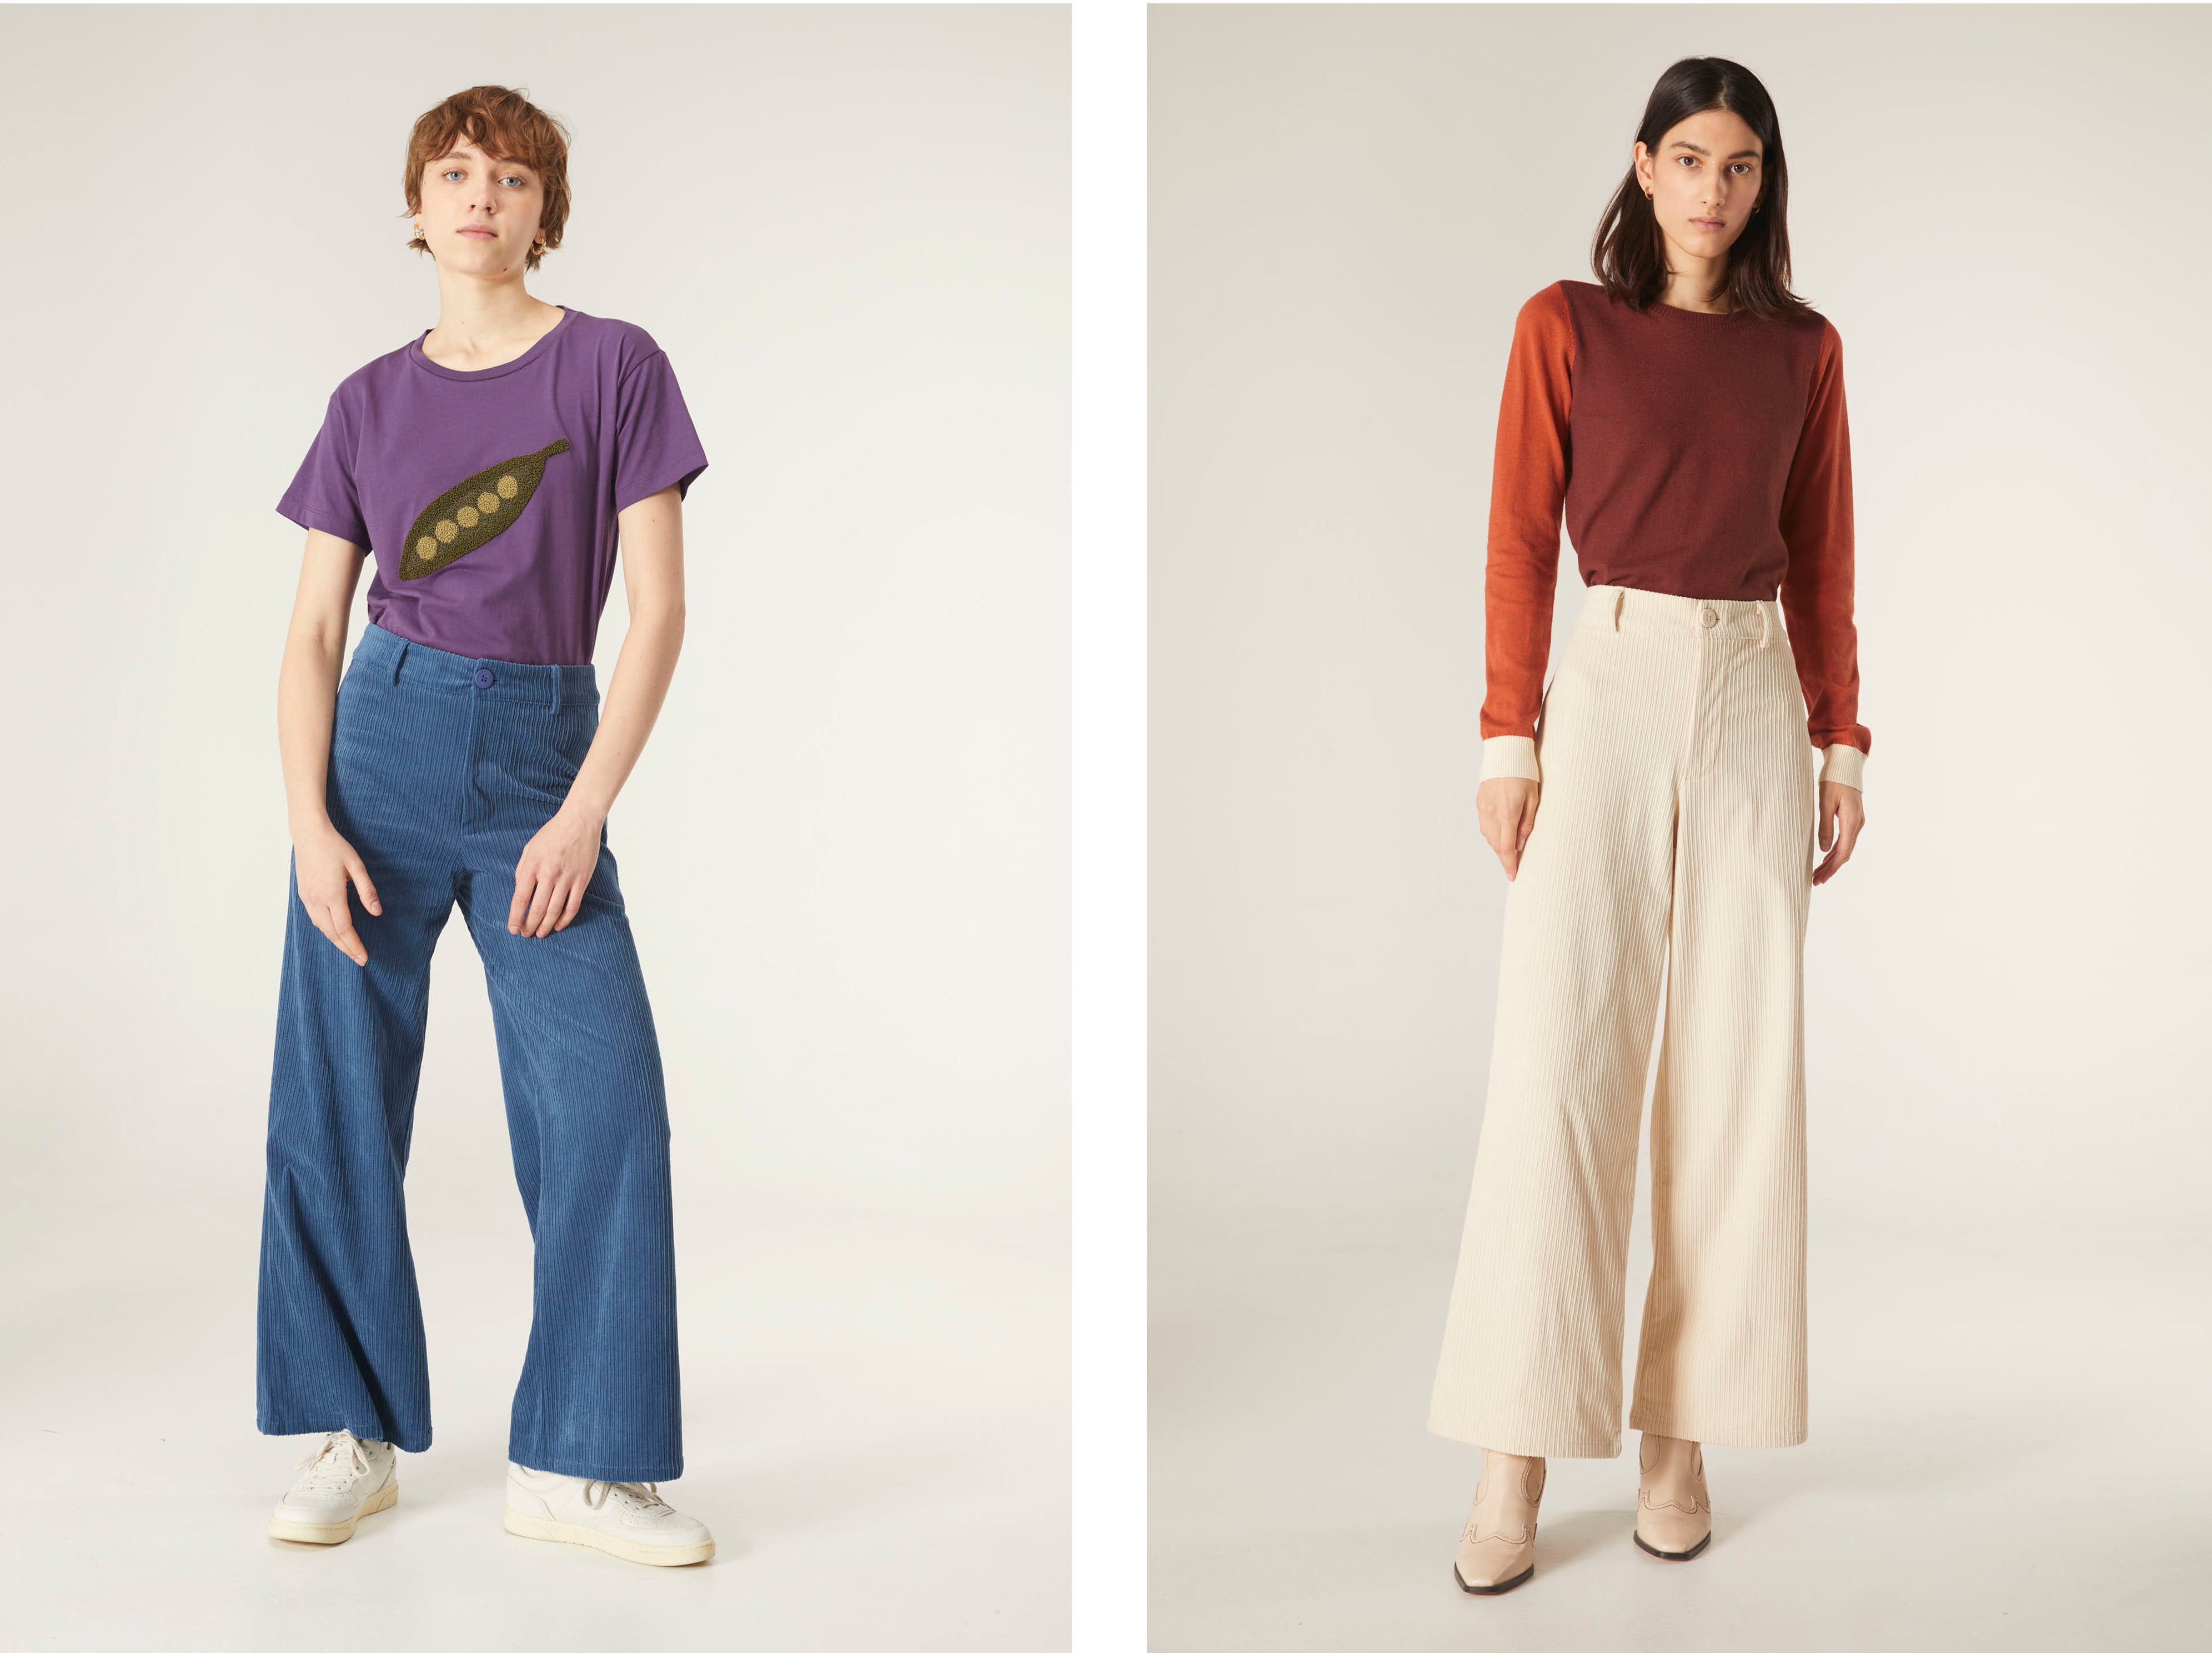 Models with corduroy pants for women from Compañía Fantástica's latest collection.